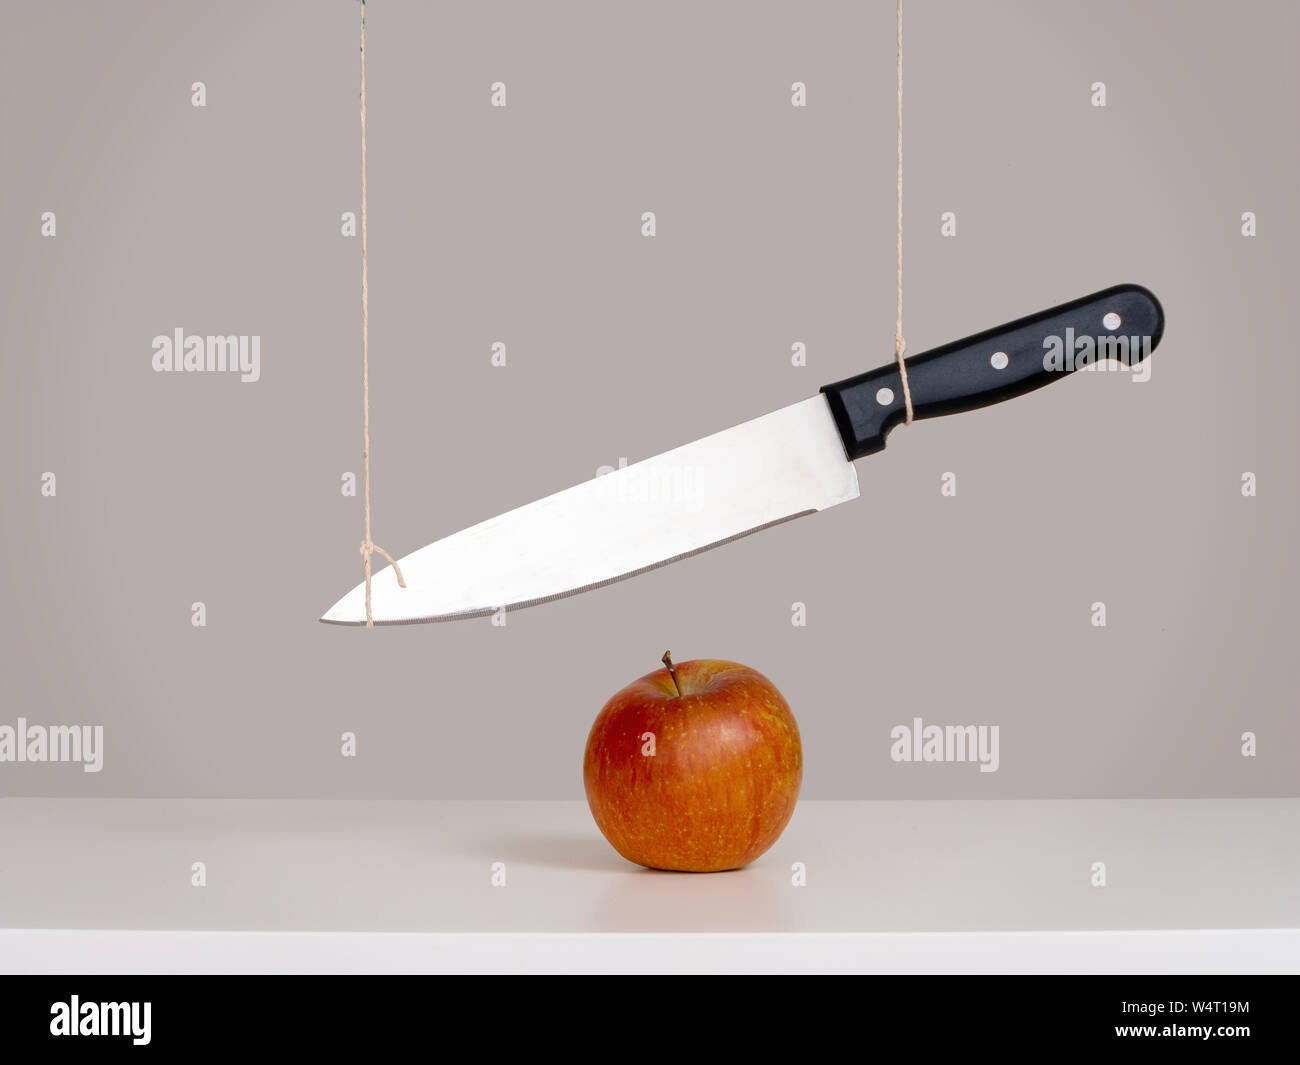 Sword of Damocles threat, risk concept, metaphor - large knife tied and suspended over apple. Still life. Stock Photo